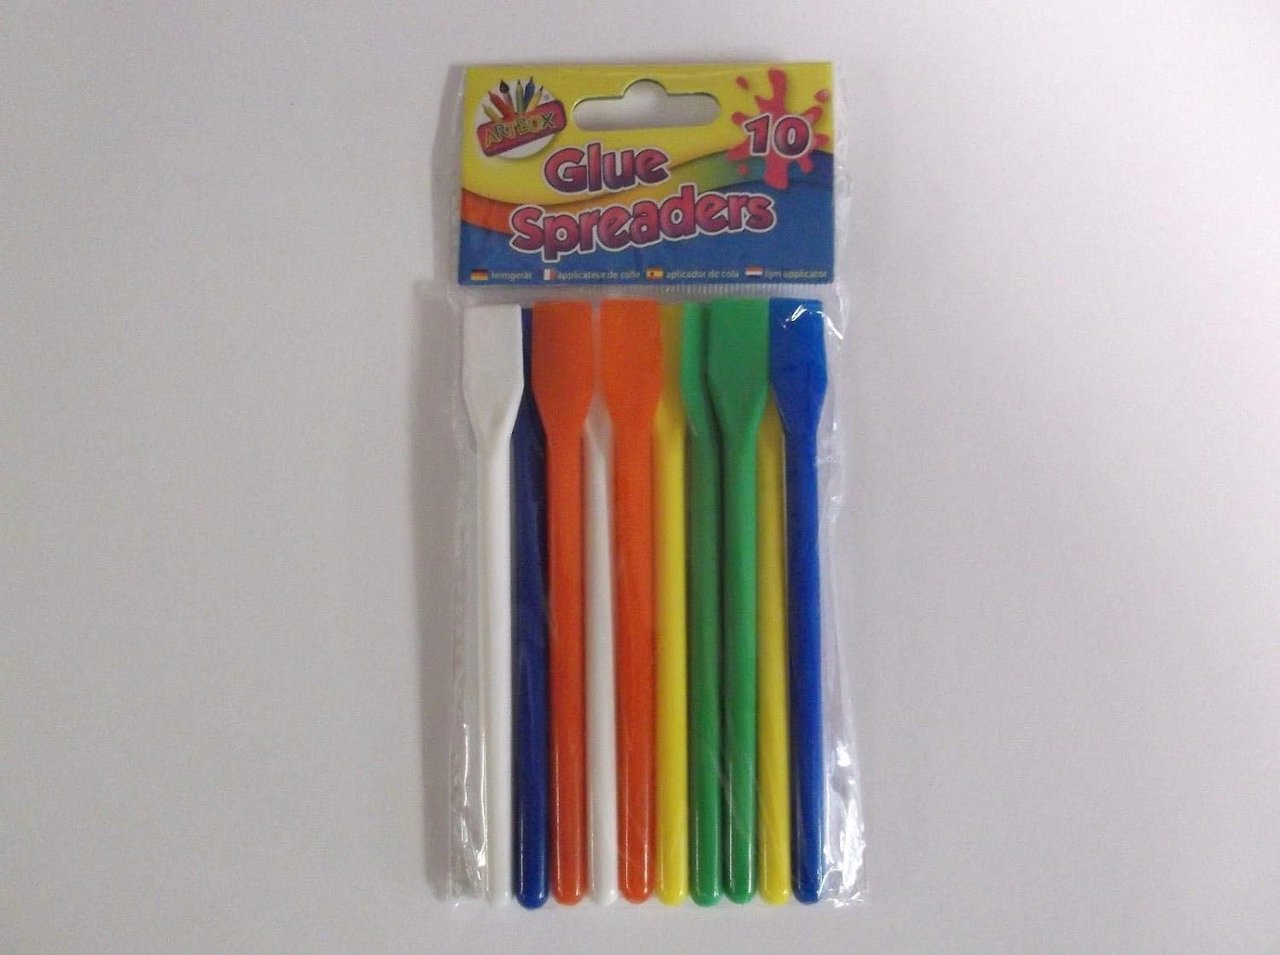 2 ArtBox 5-Inch Coloured Glue Spreader (Pack of 10)